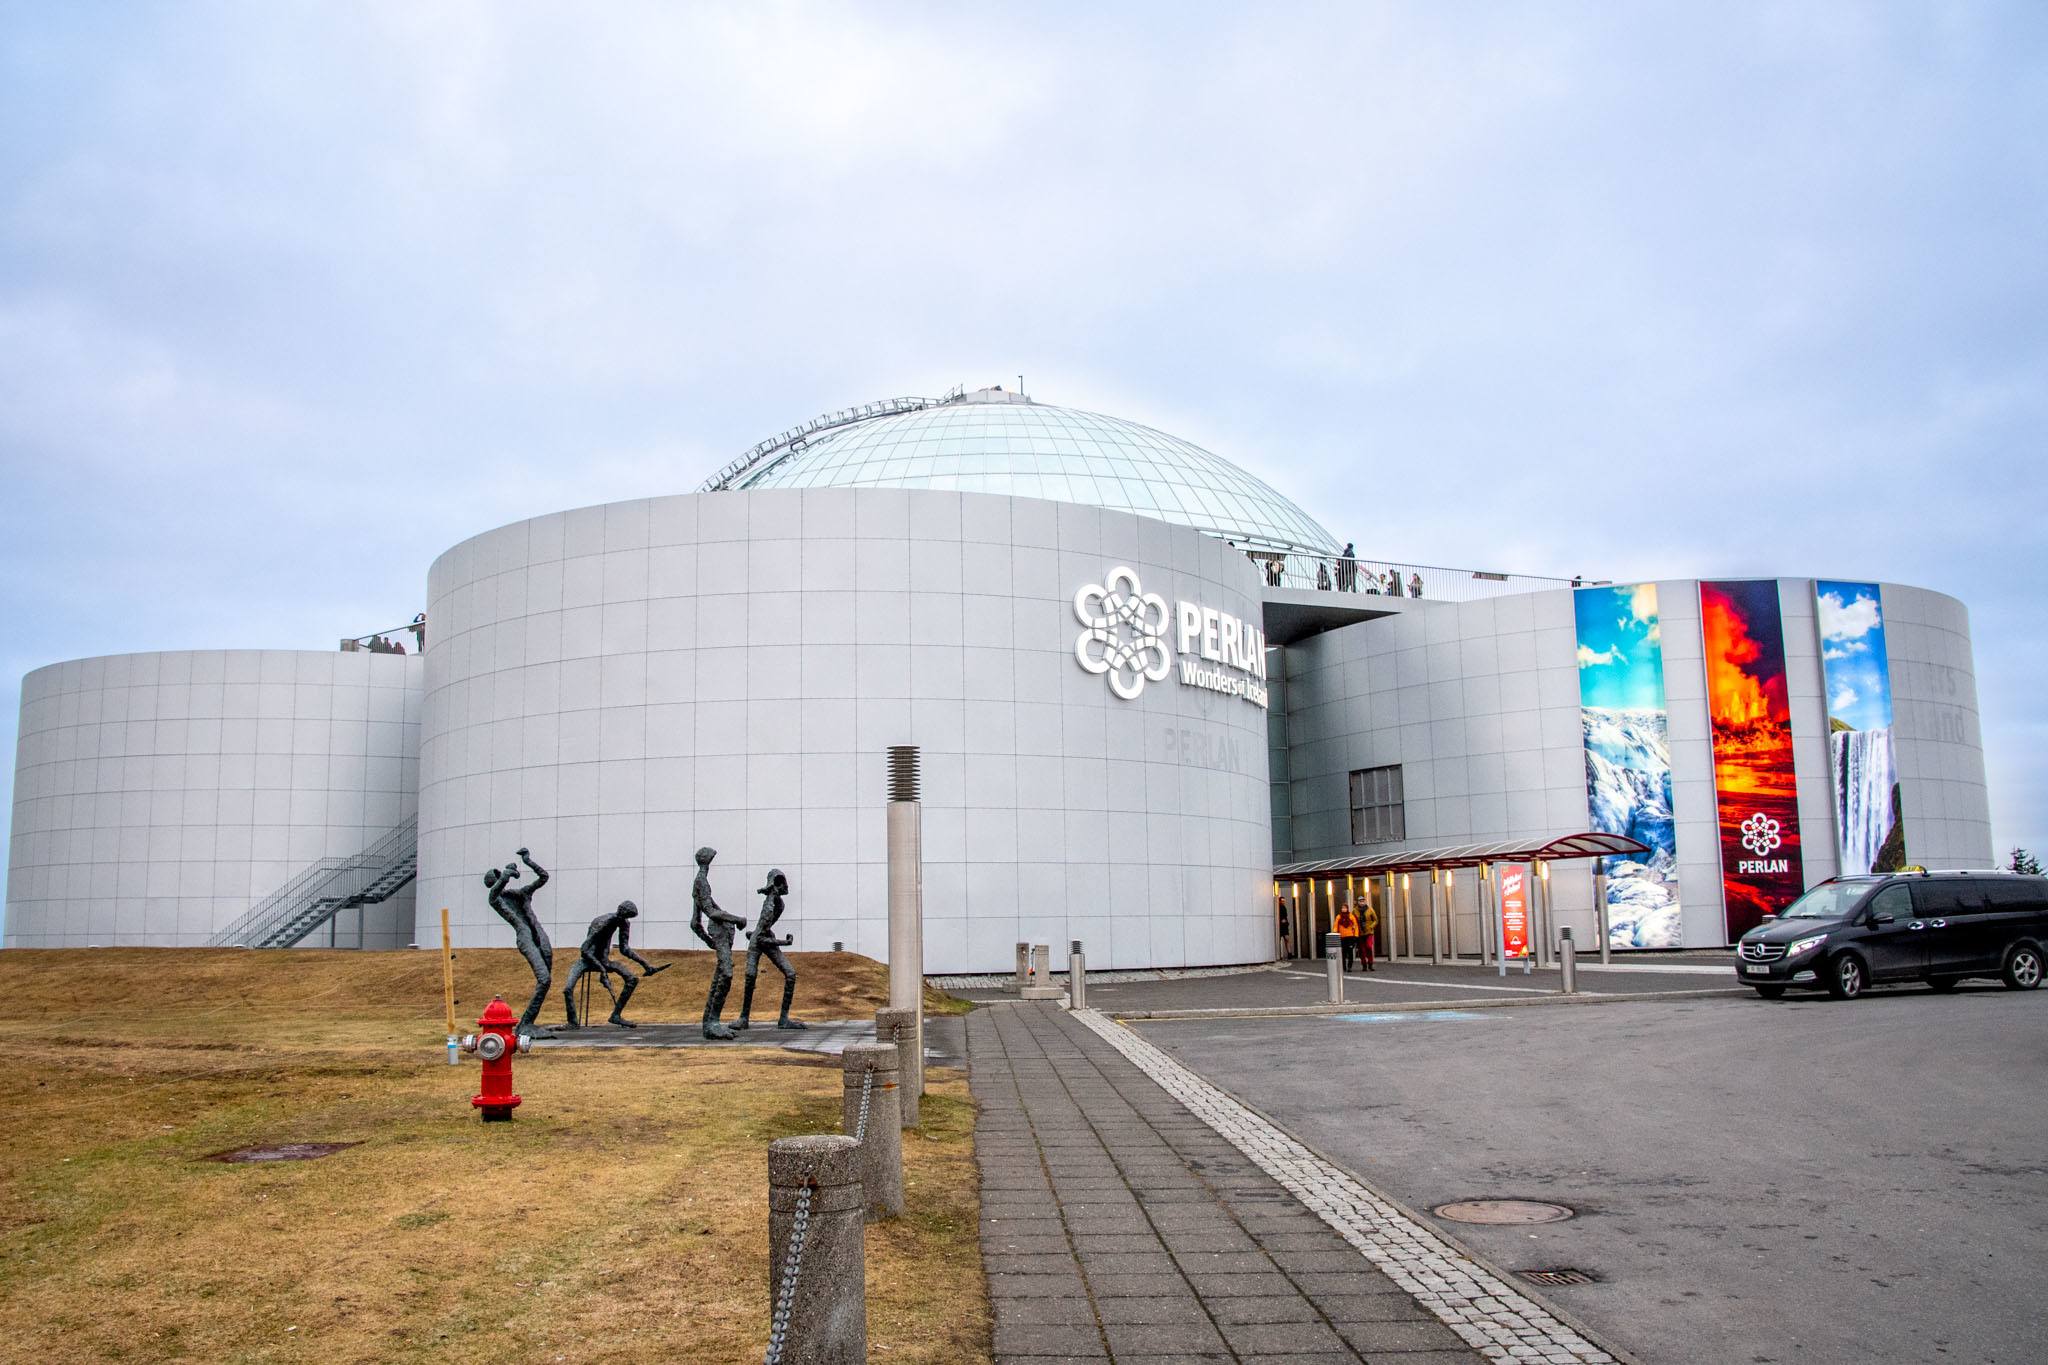 The Perlan in Reykjavik is a cultural center built in the city's old water storage towers